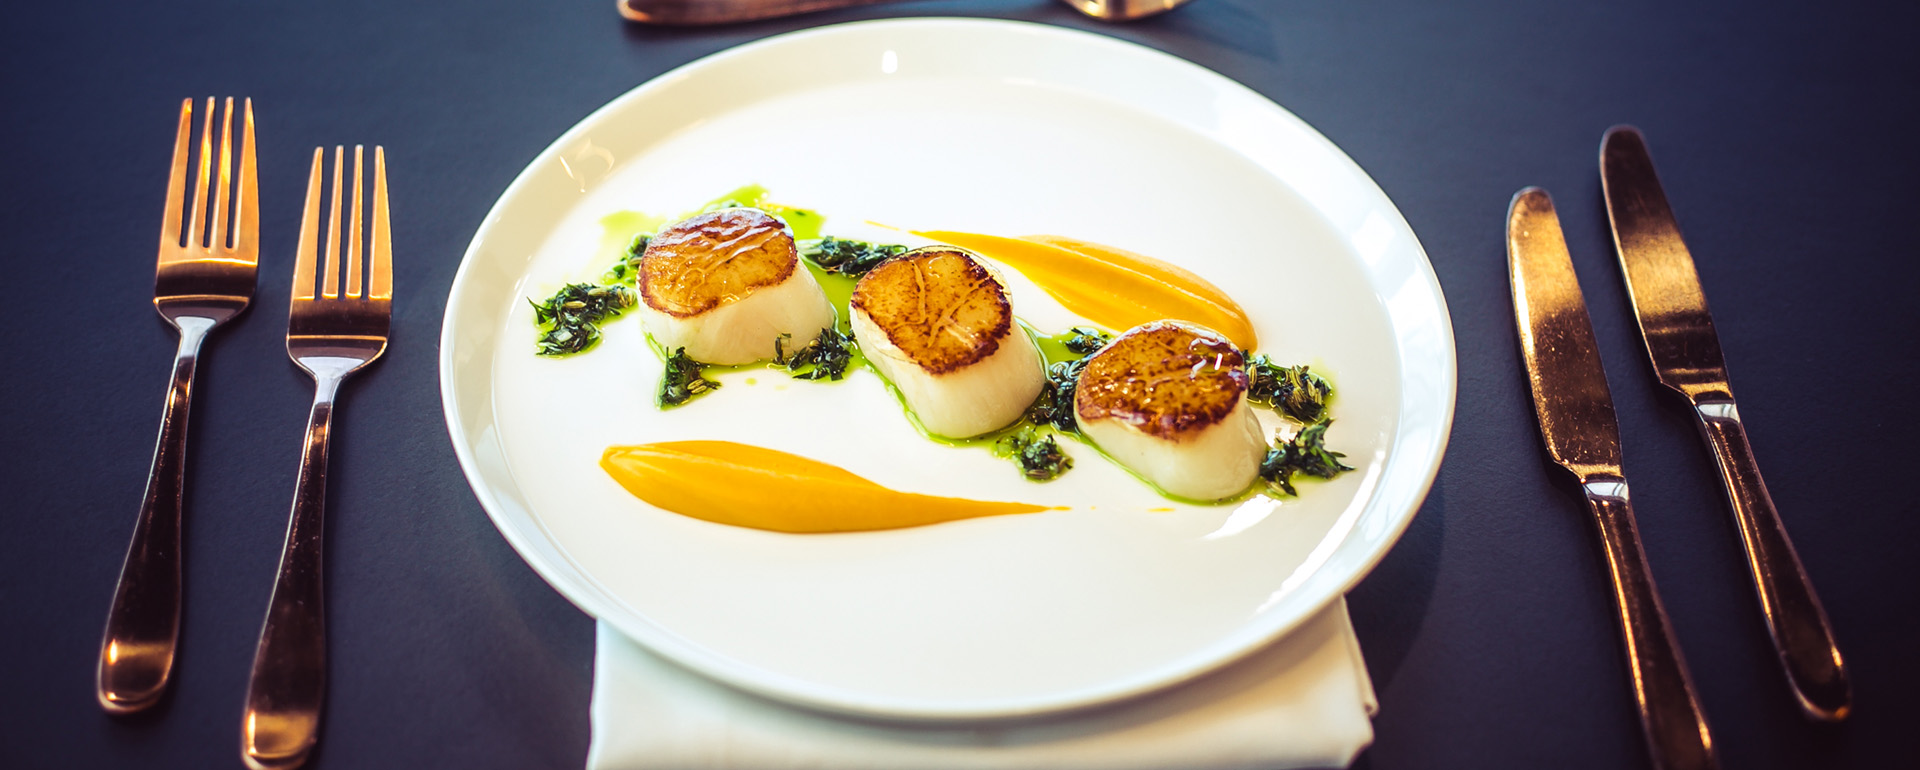 Fine dining plate with scallops